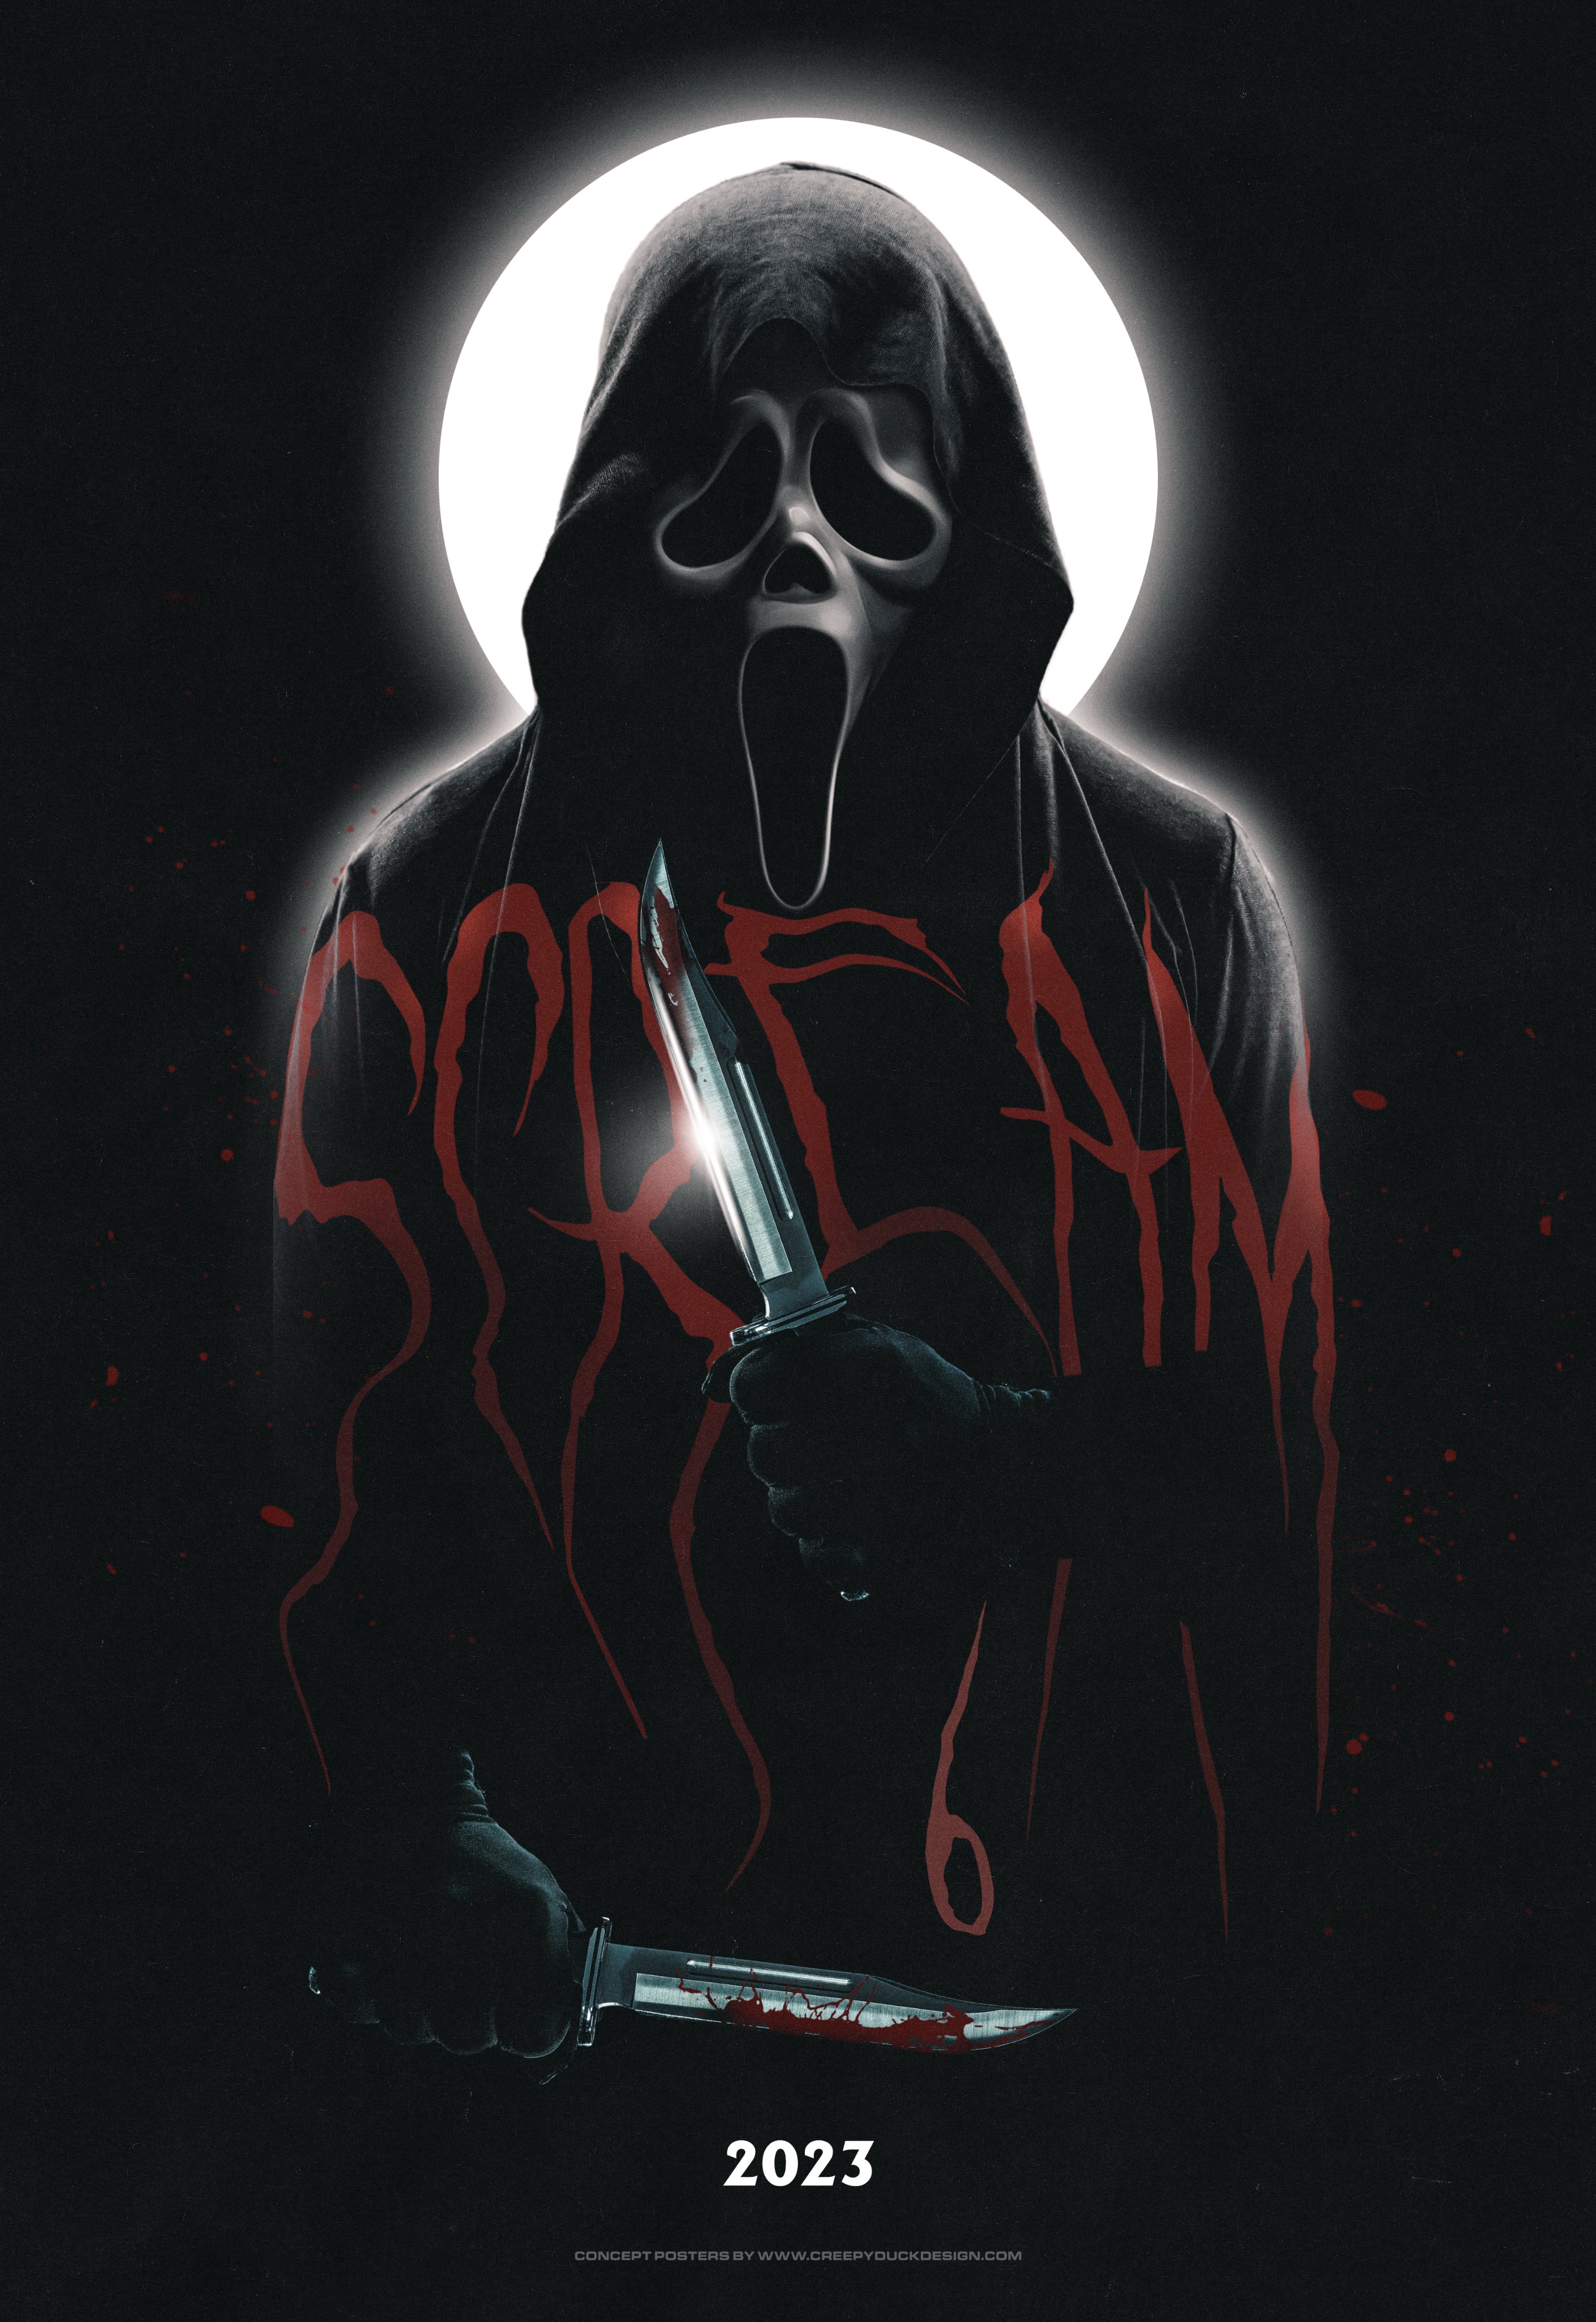 Creepy Duck Design's another new #scream 6 concept poster to lead you into the weekend. Featuring a double knifed #Ghostface doing his creepy thing in the moonlight! #HorrorMovies #digitalart #